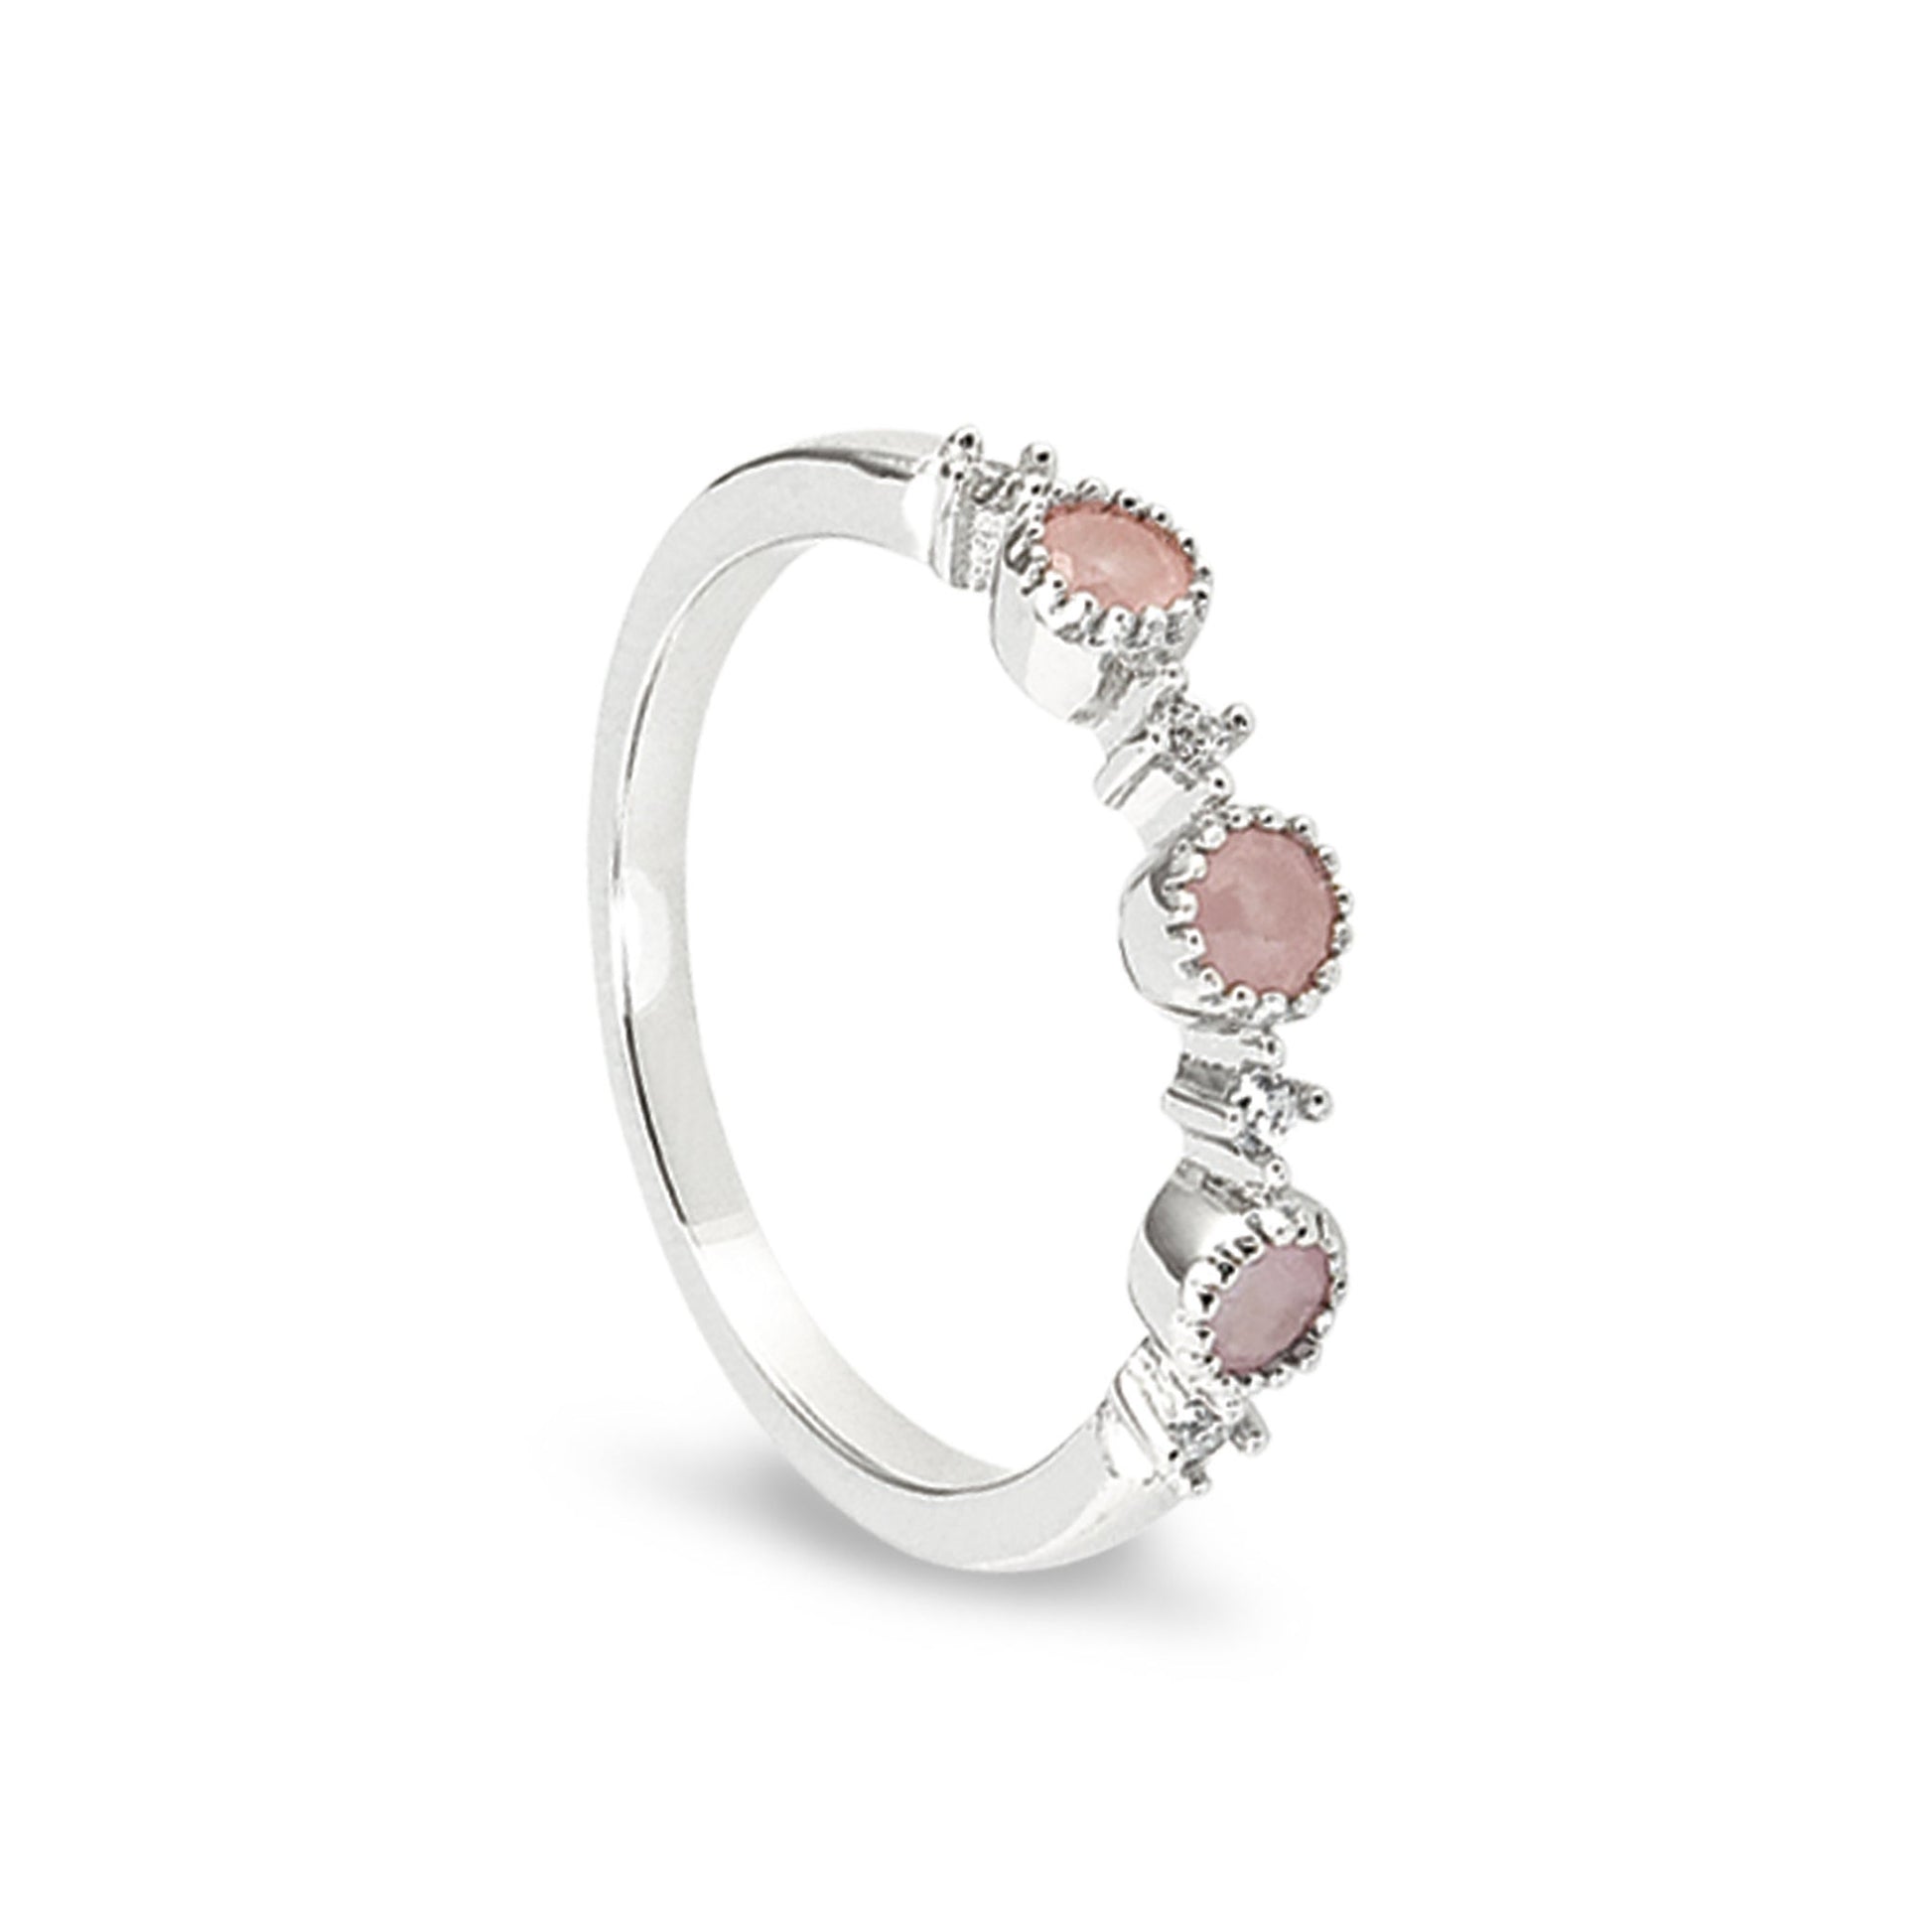 A pink three stone ring with simulated diamonds displayed on a neutral white background.